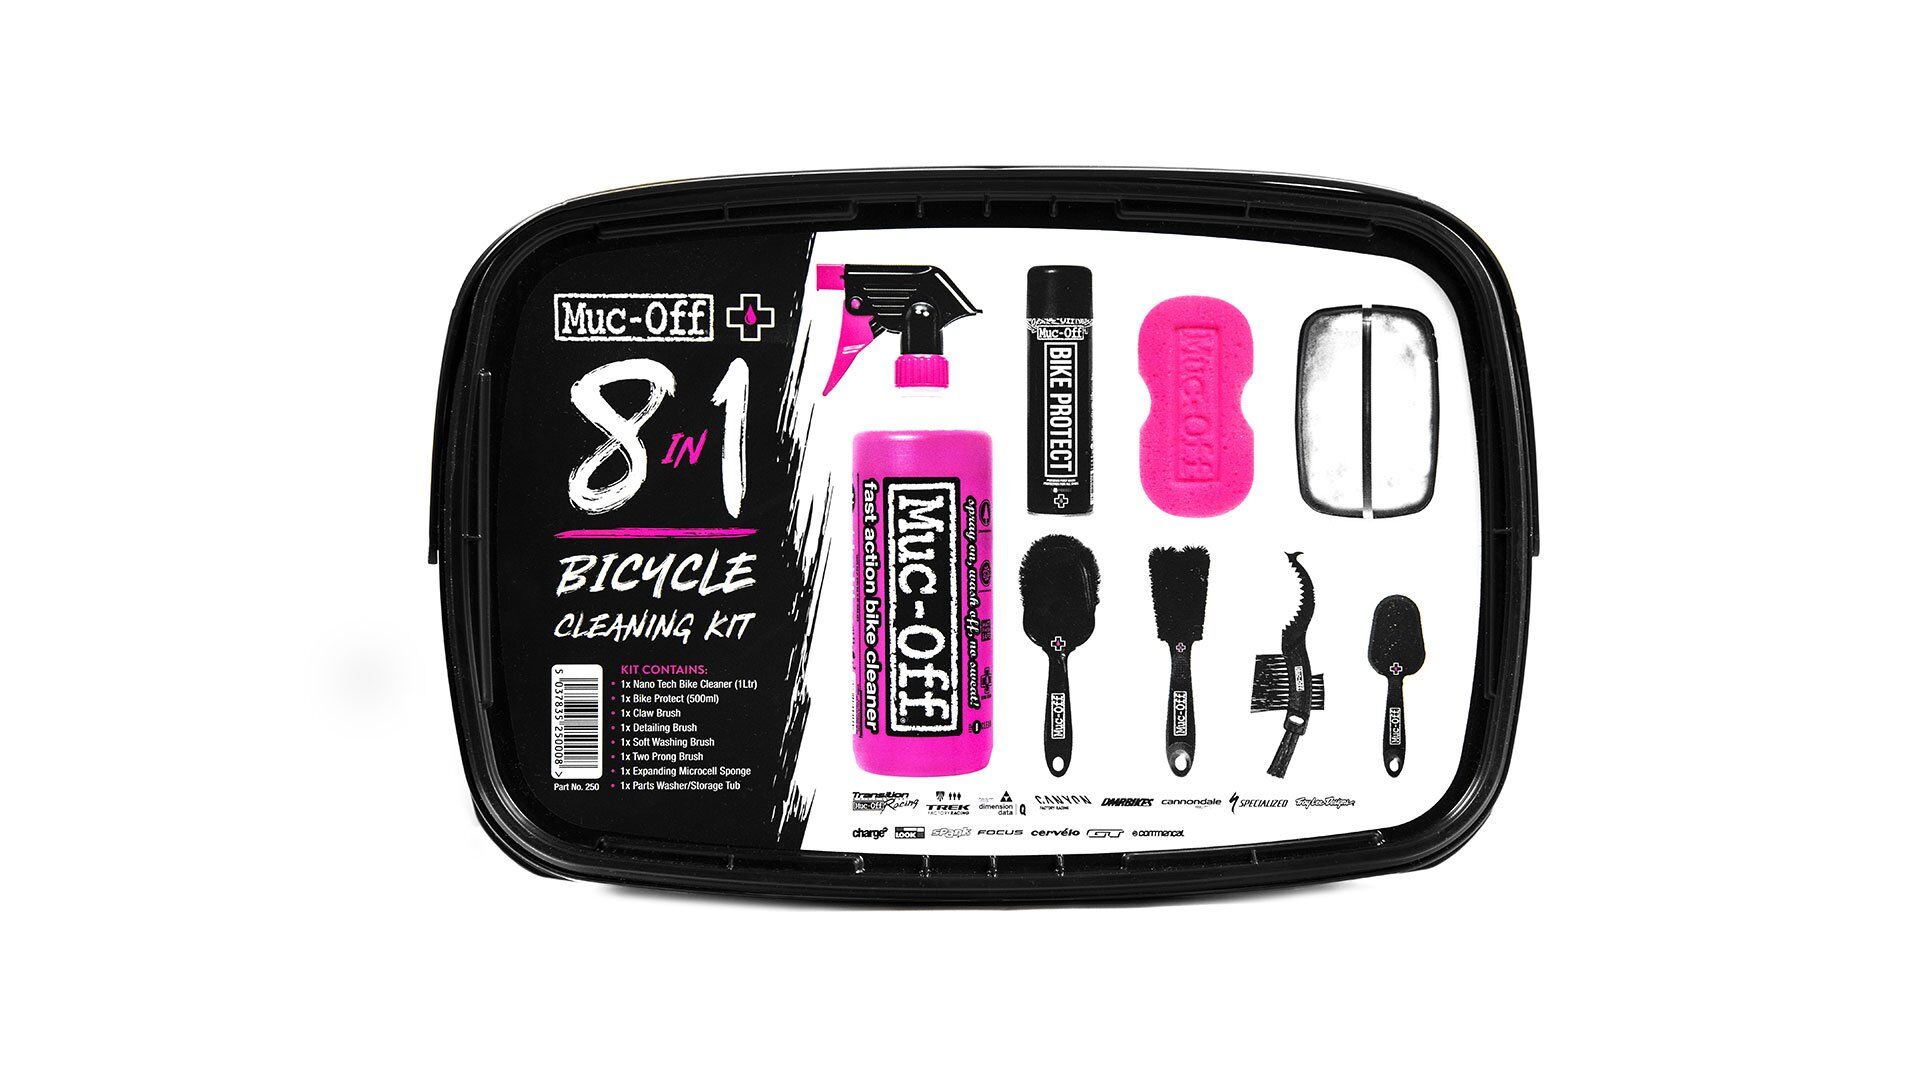 Muc-Off 8 In 1 Bicycle Cleaning Kit - Bike cleaning kit